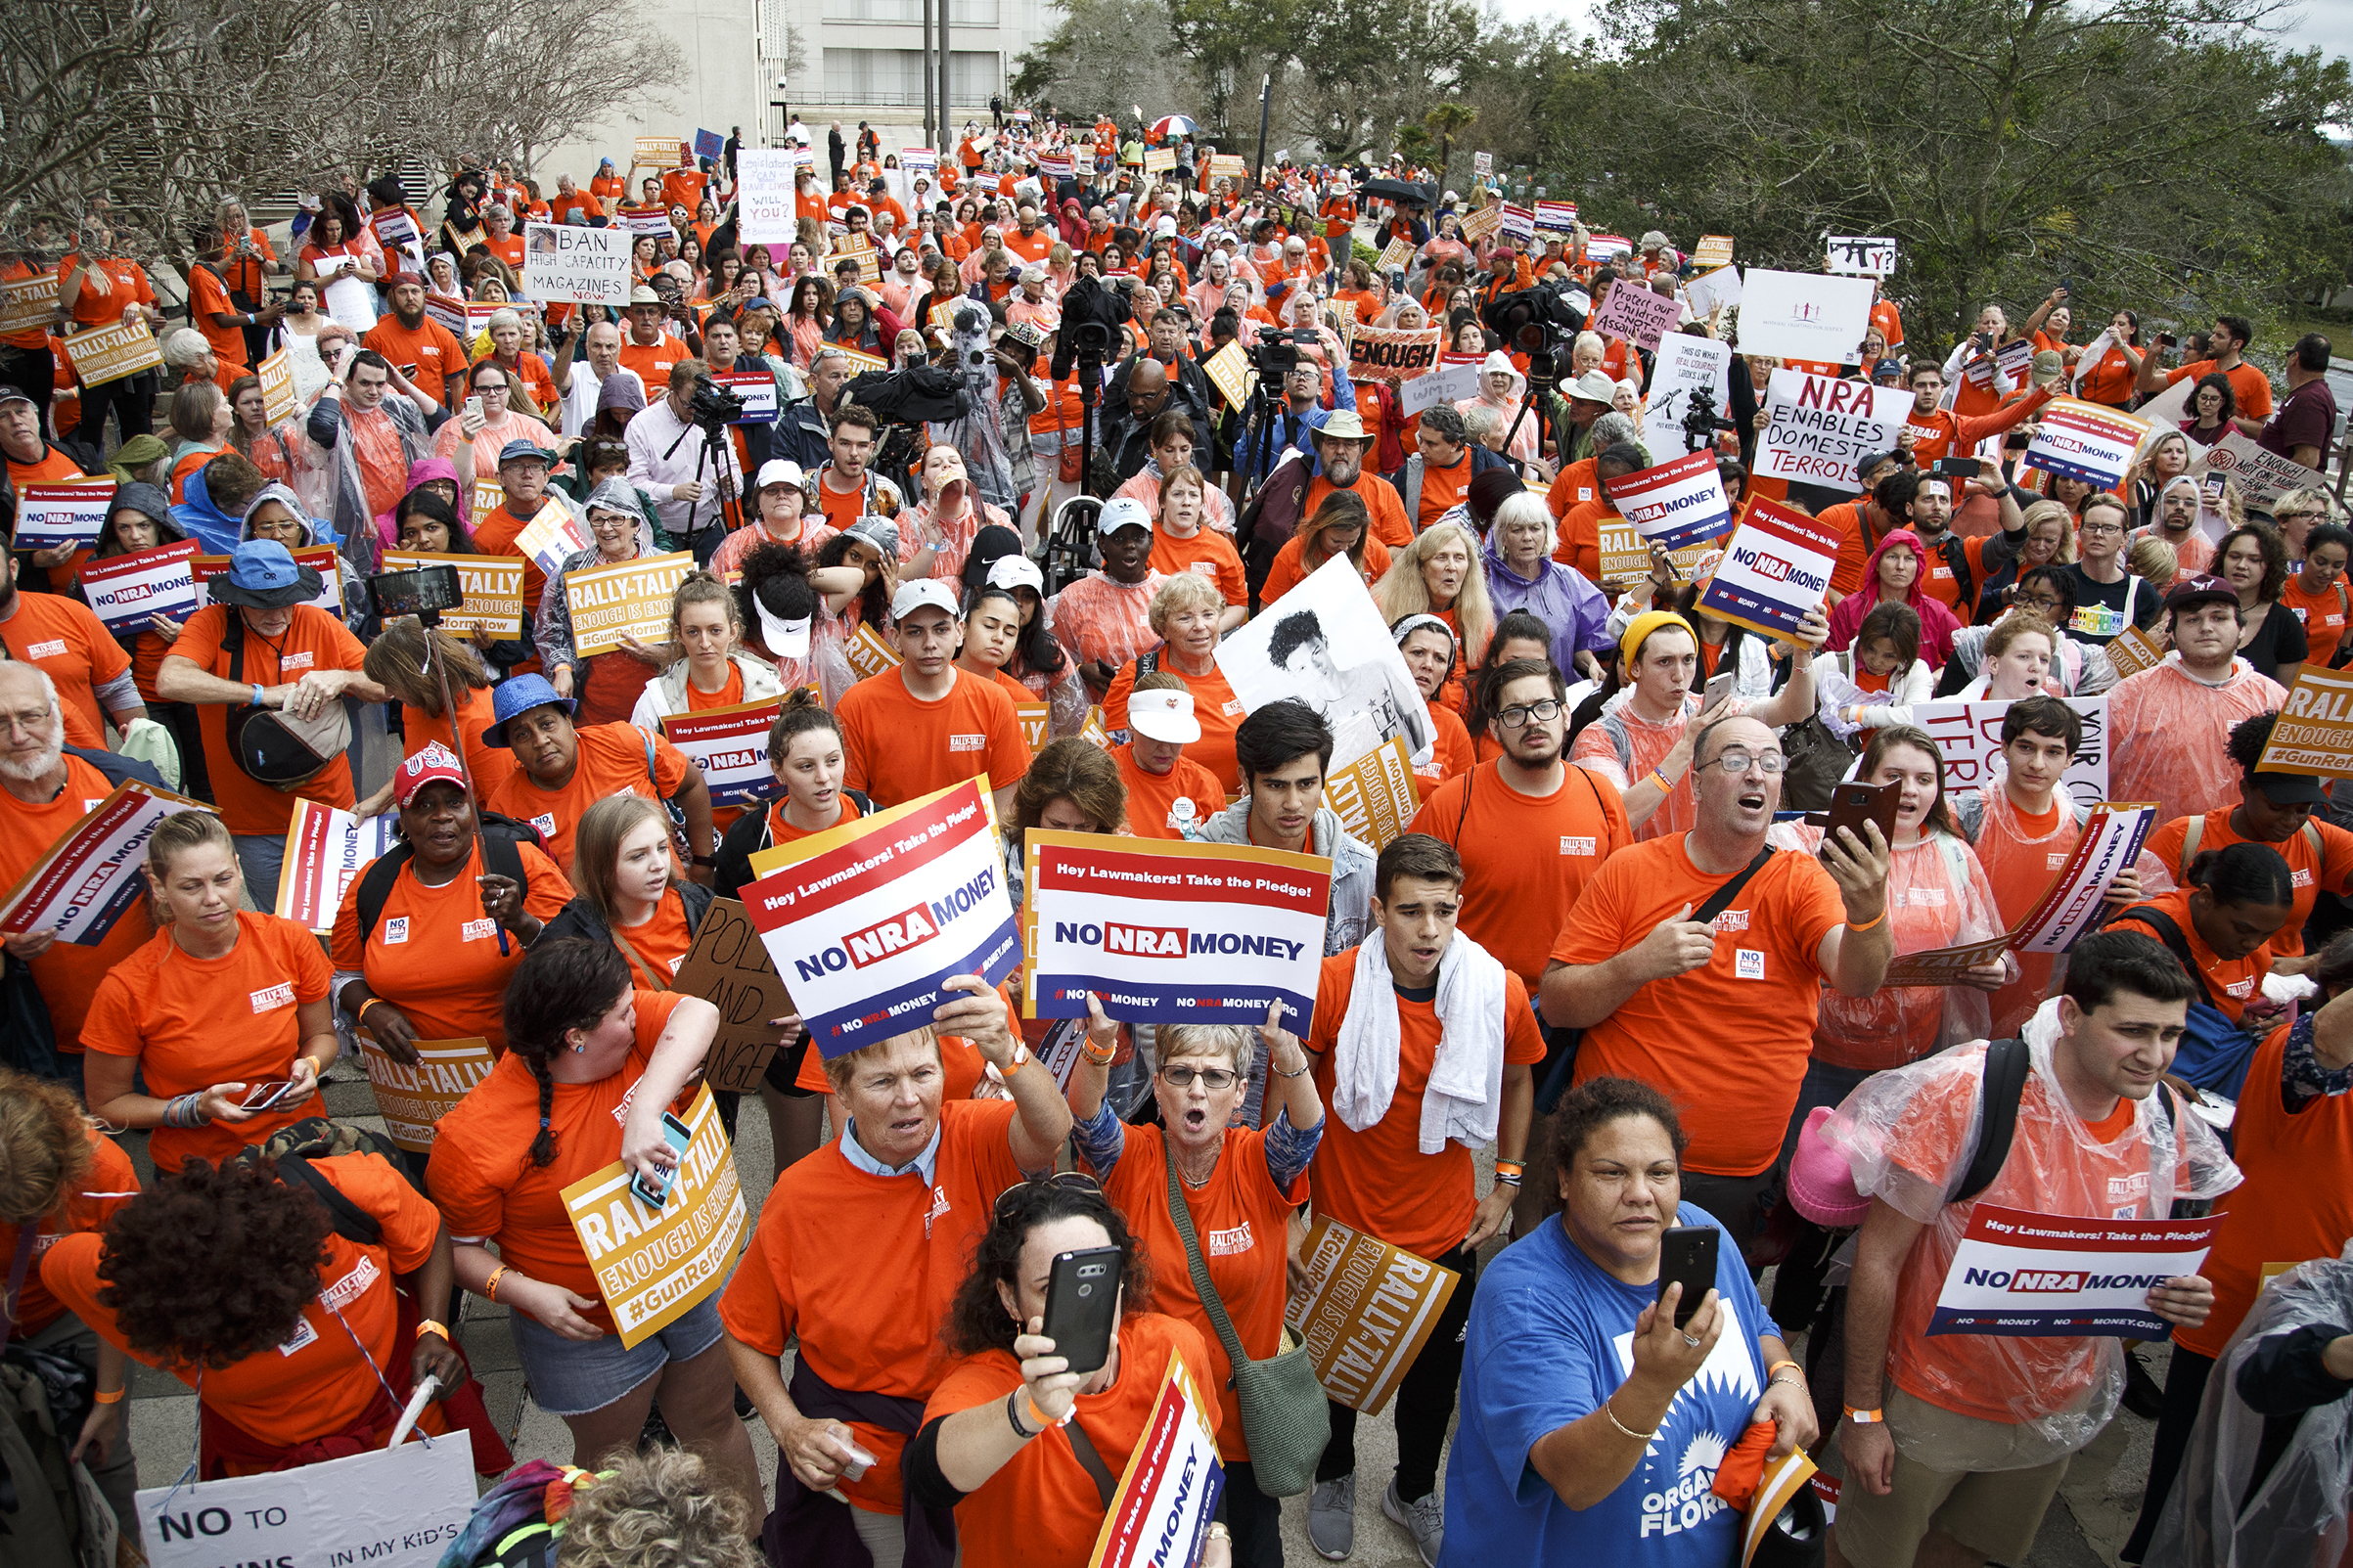 Activists hold up signs at the Florida State Capitol as they rally for gun reform legislation in Tallahassee, Fla., on Feb. 26, 2018. (Don Juan Moore—Getty Images)